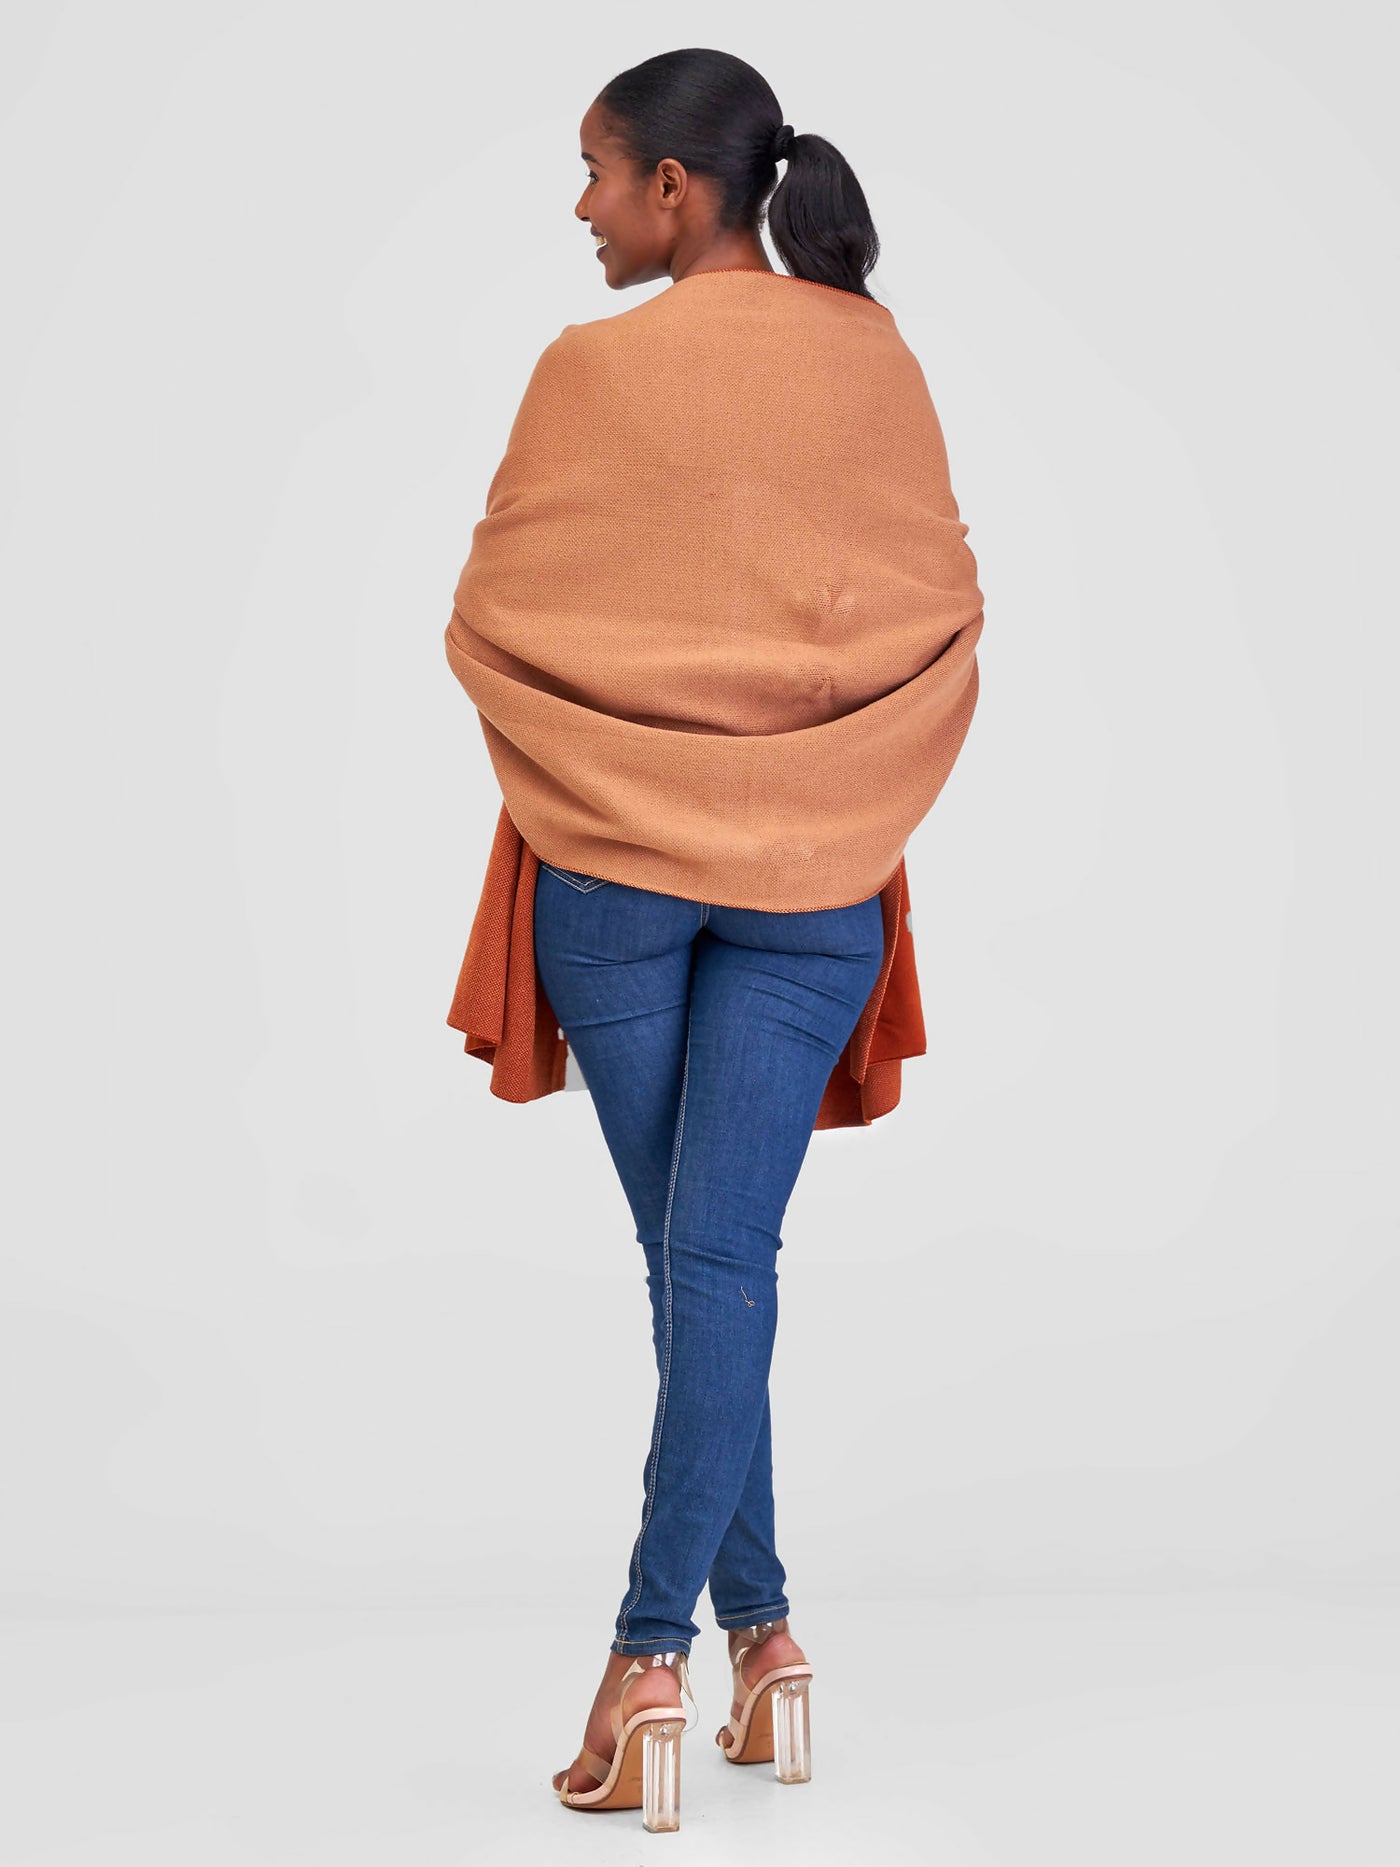 Anel's Knitwear Stunner Poncho - Nude / Rust